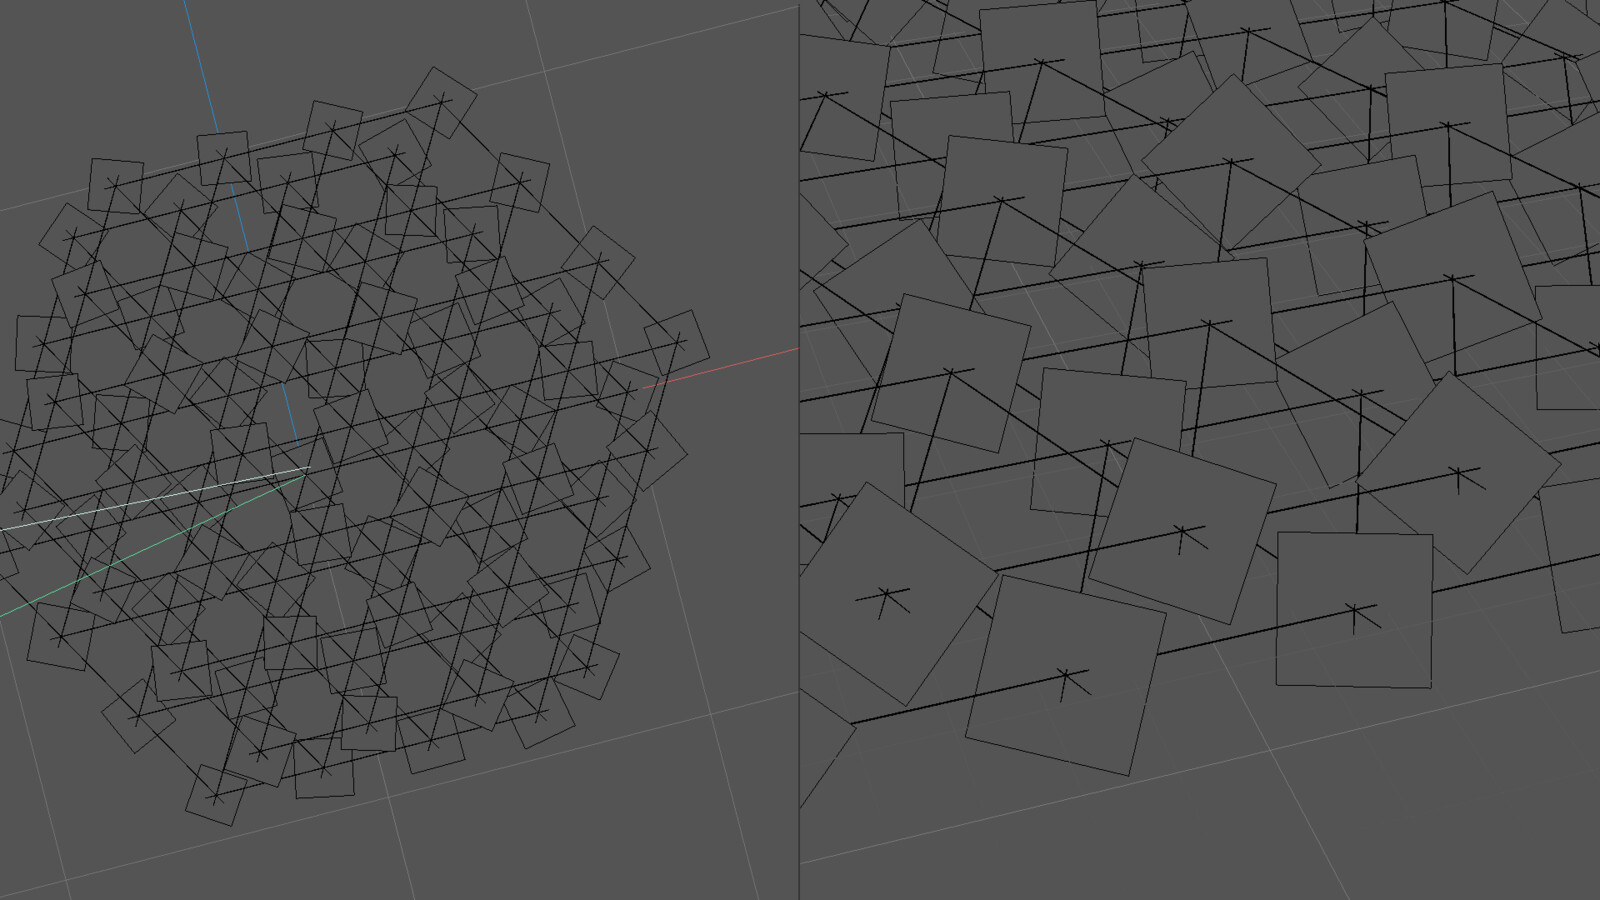 Wireframe. Rather than true 3D spheres, I used camera-mapped 2D planes.